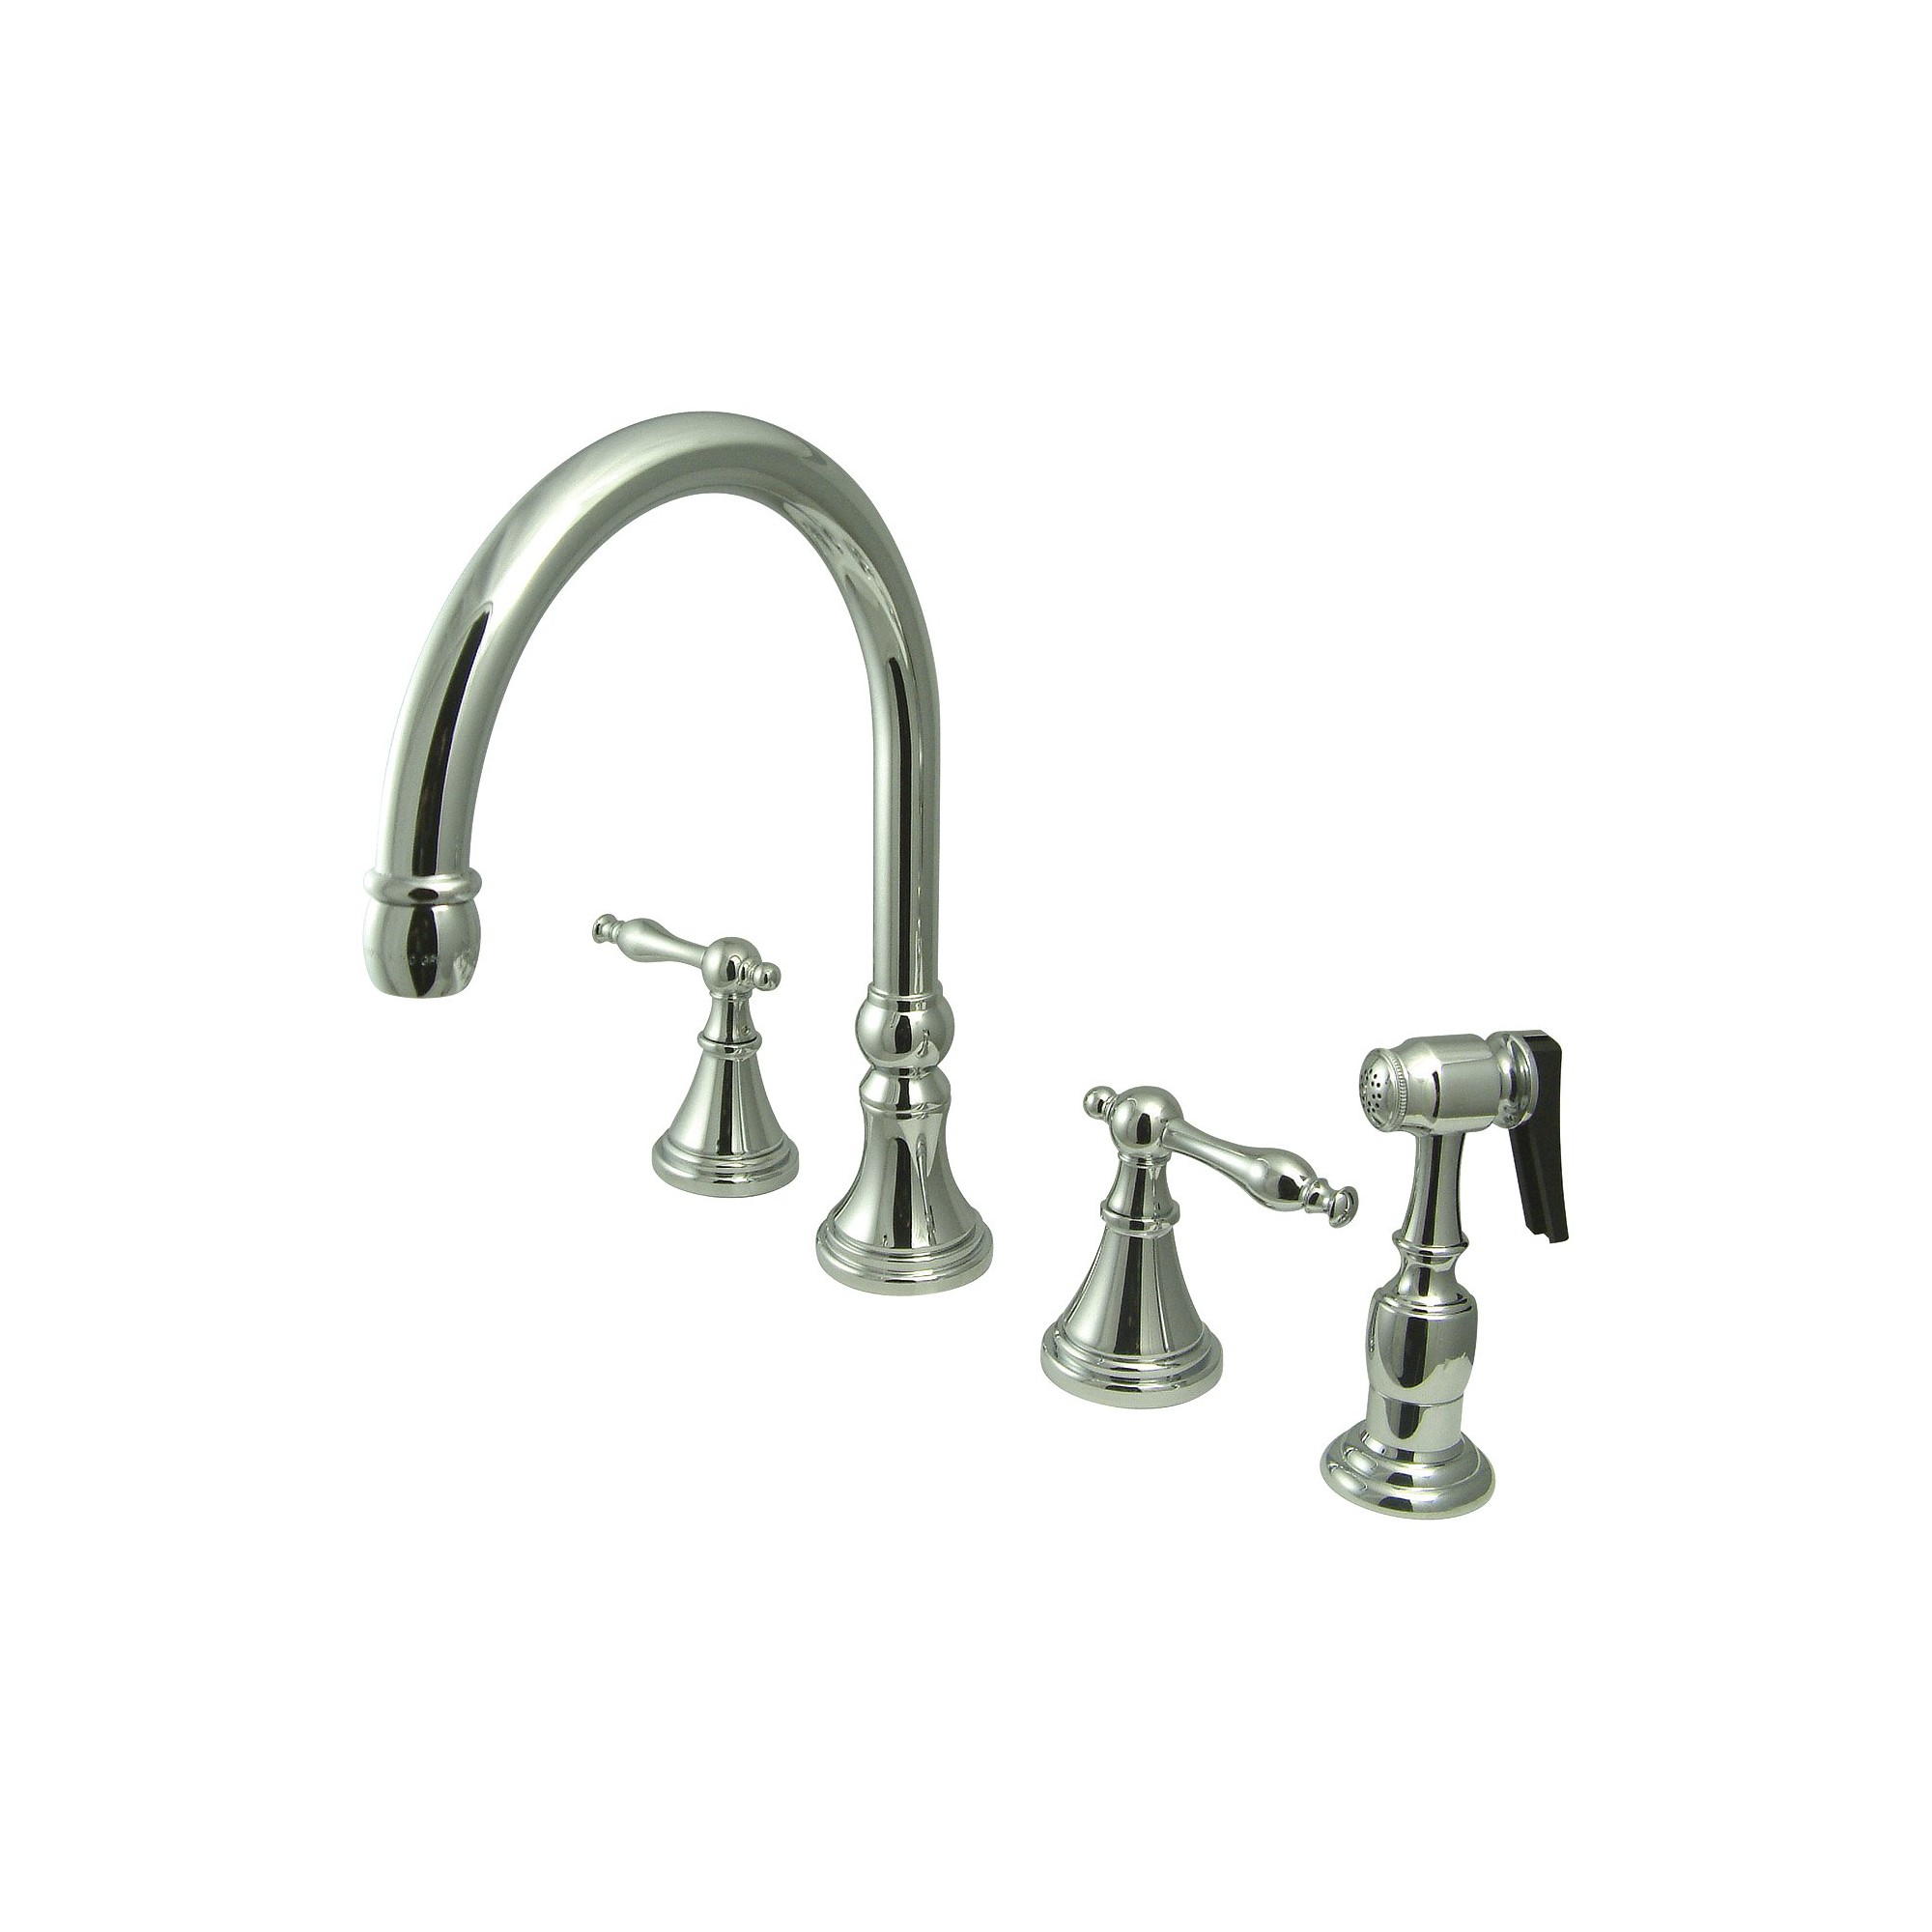 Chrome Widespead 4-Hole Solid Brass Kitchen Faucet - Kingston Brass